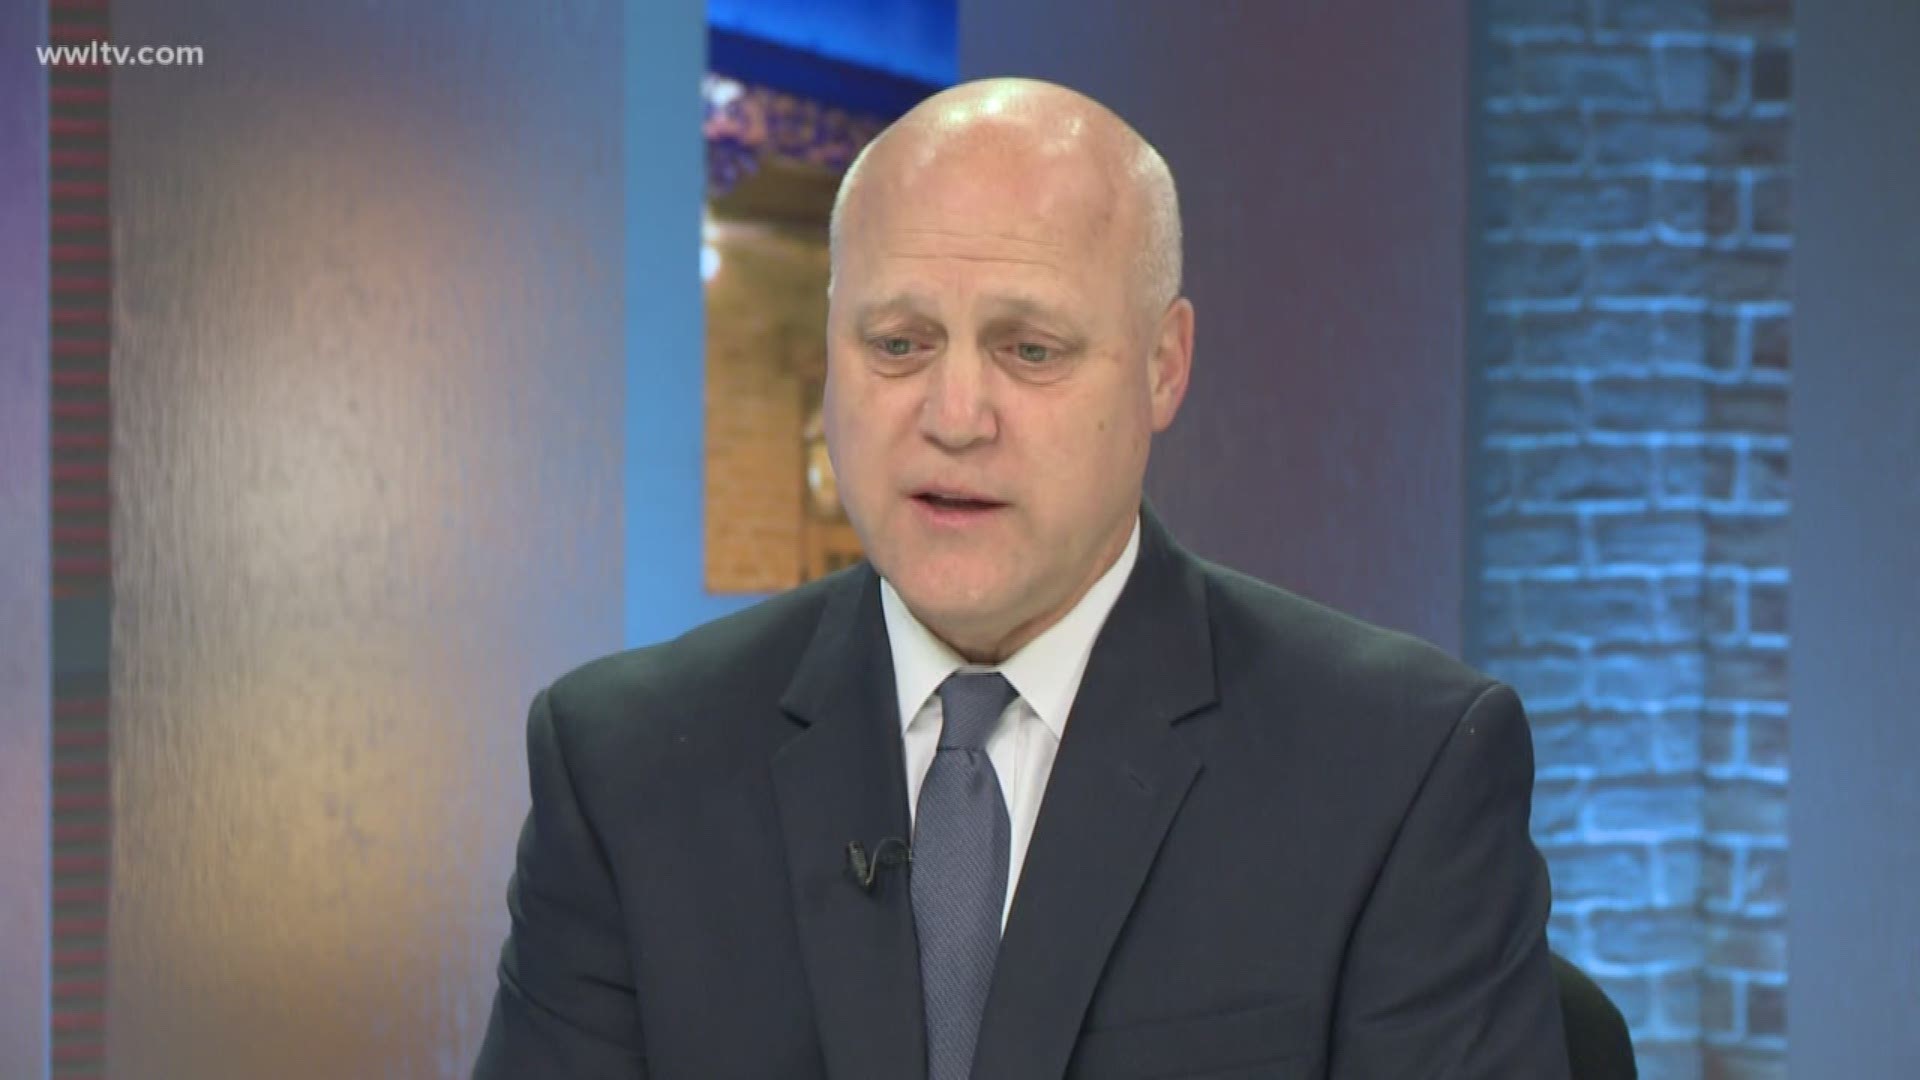 Mayor Landrieu previews new book on Confederate monument removal